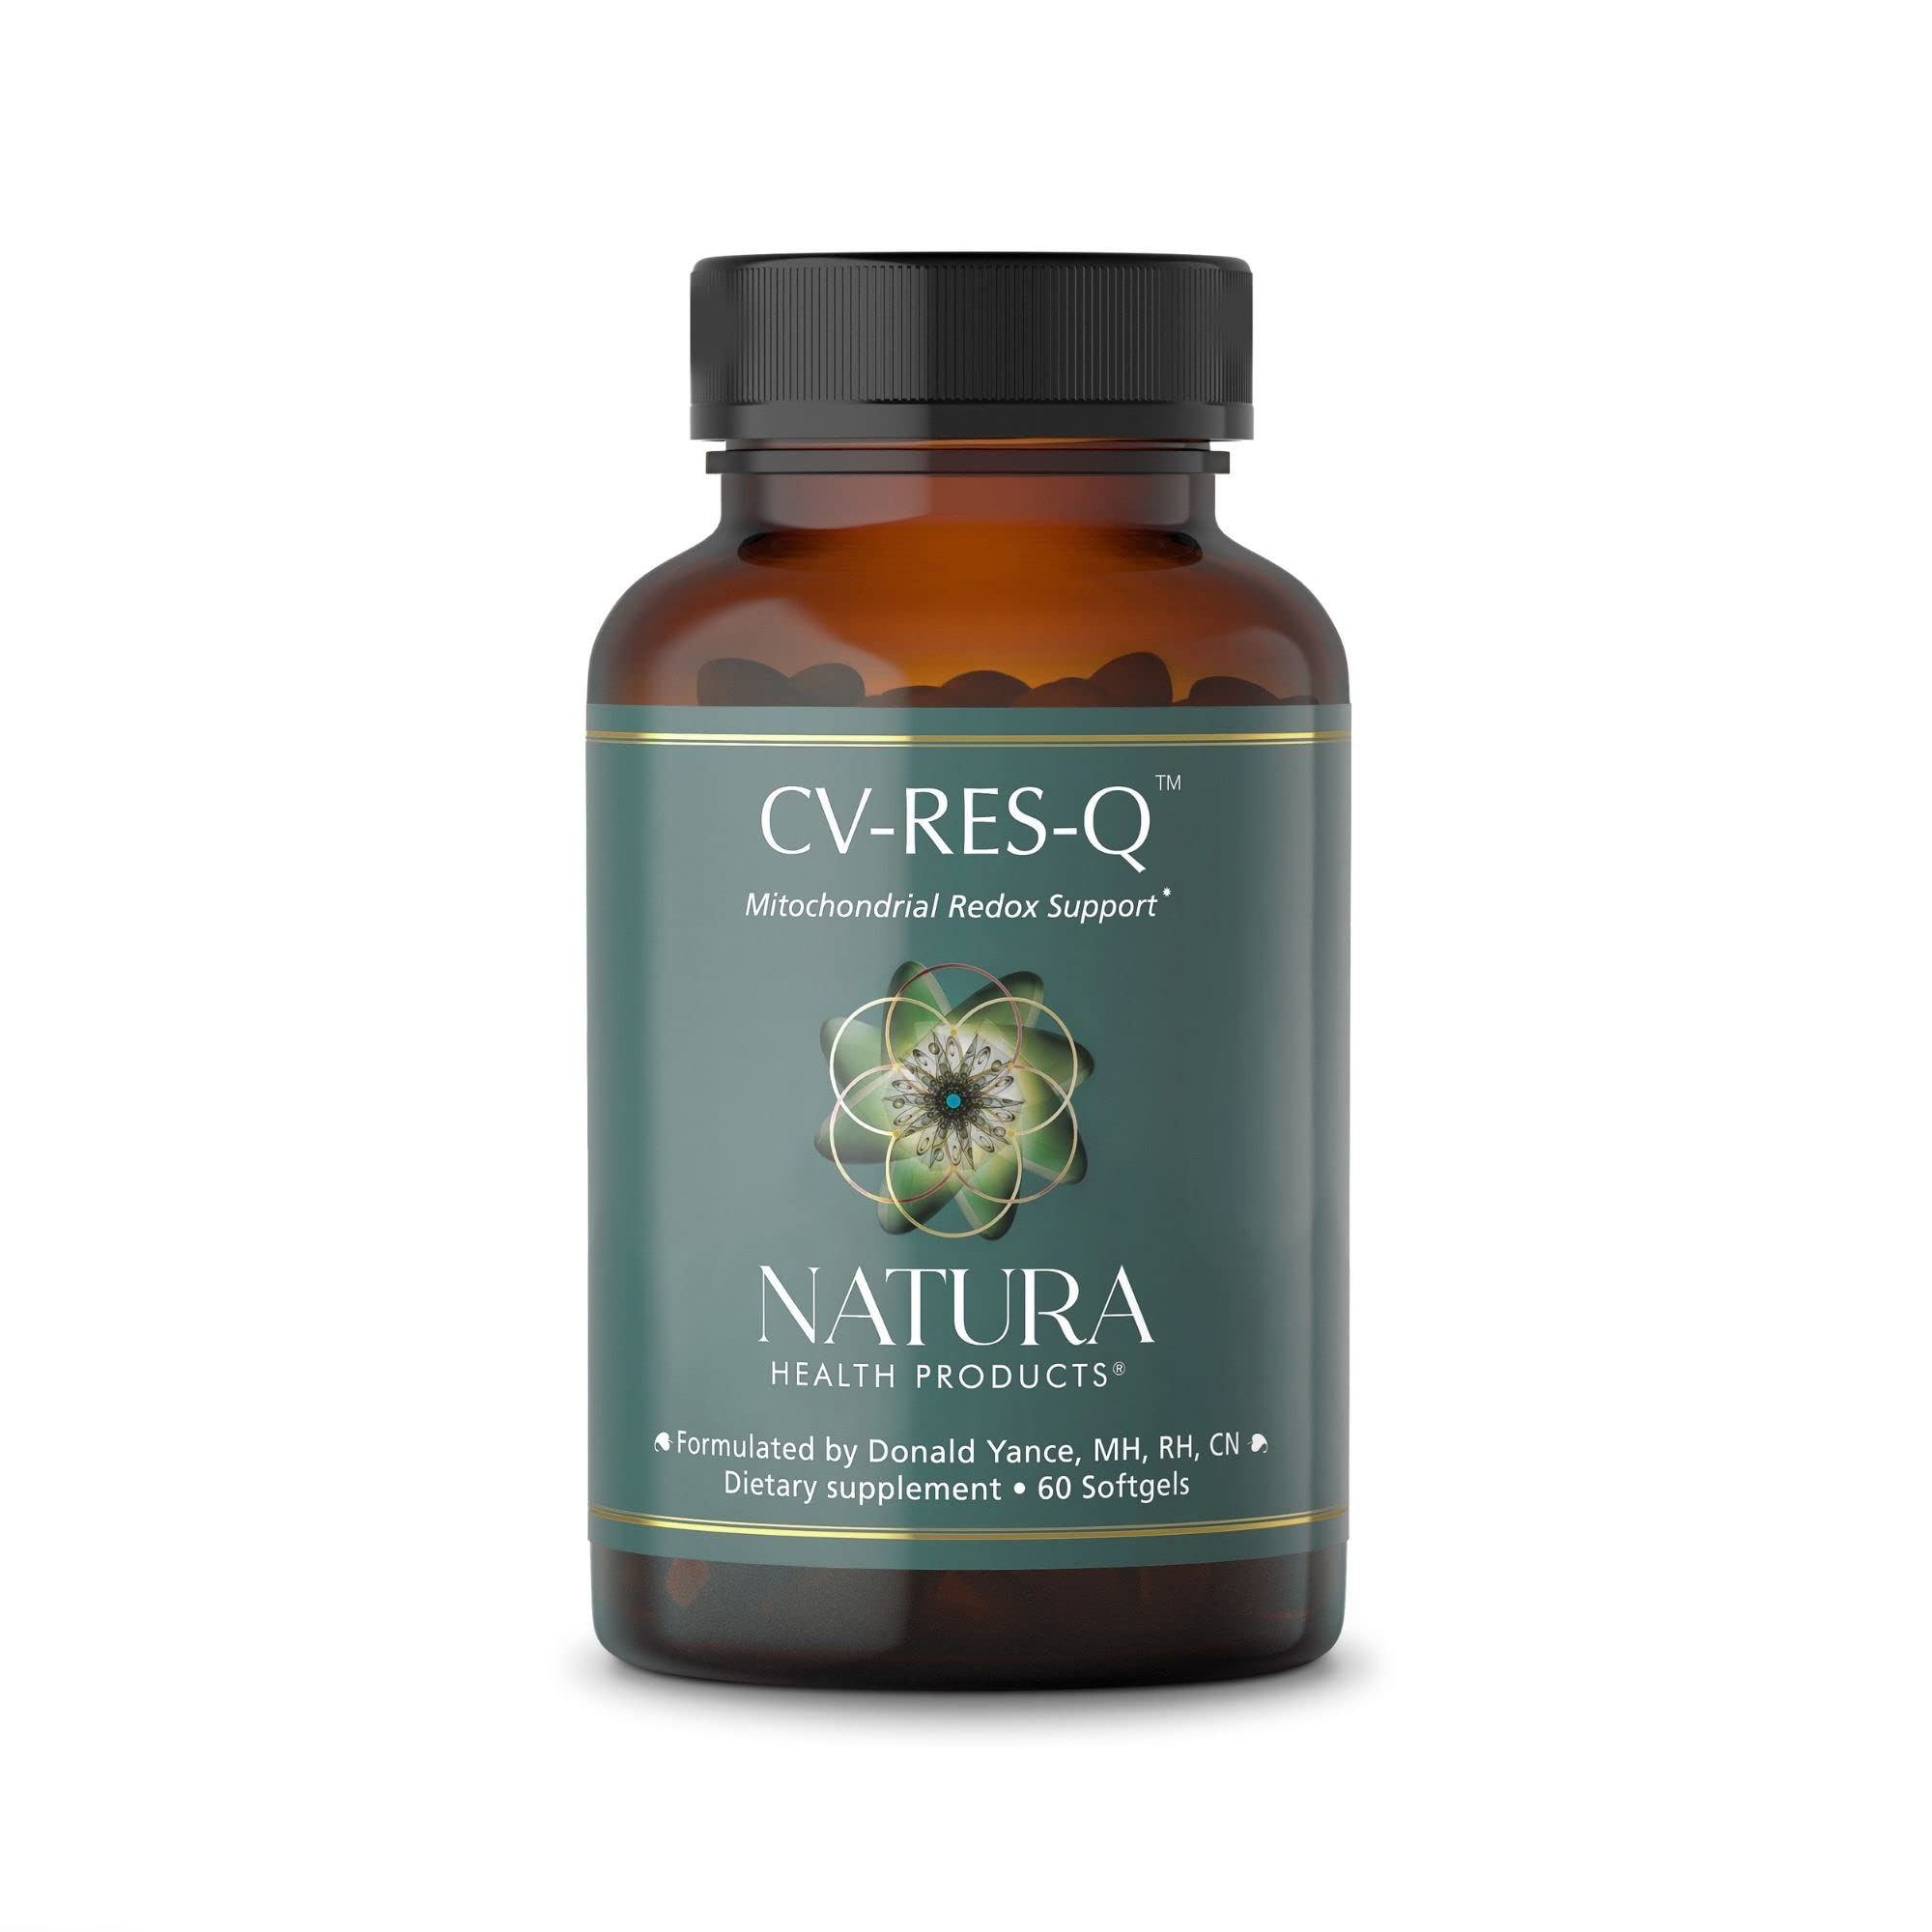 Natura Health Products - CV-Res-Q Resveratrol Antioxidant and Heart Cardiovascular Supplement - with Quercetin, CoQ10, Bioperine, and Resveratrol -...